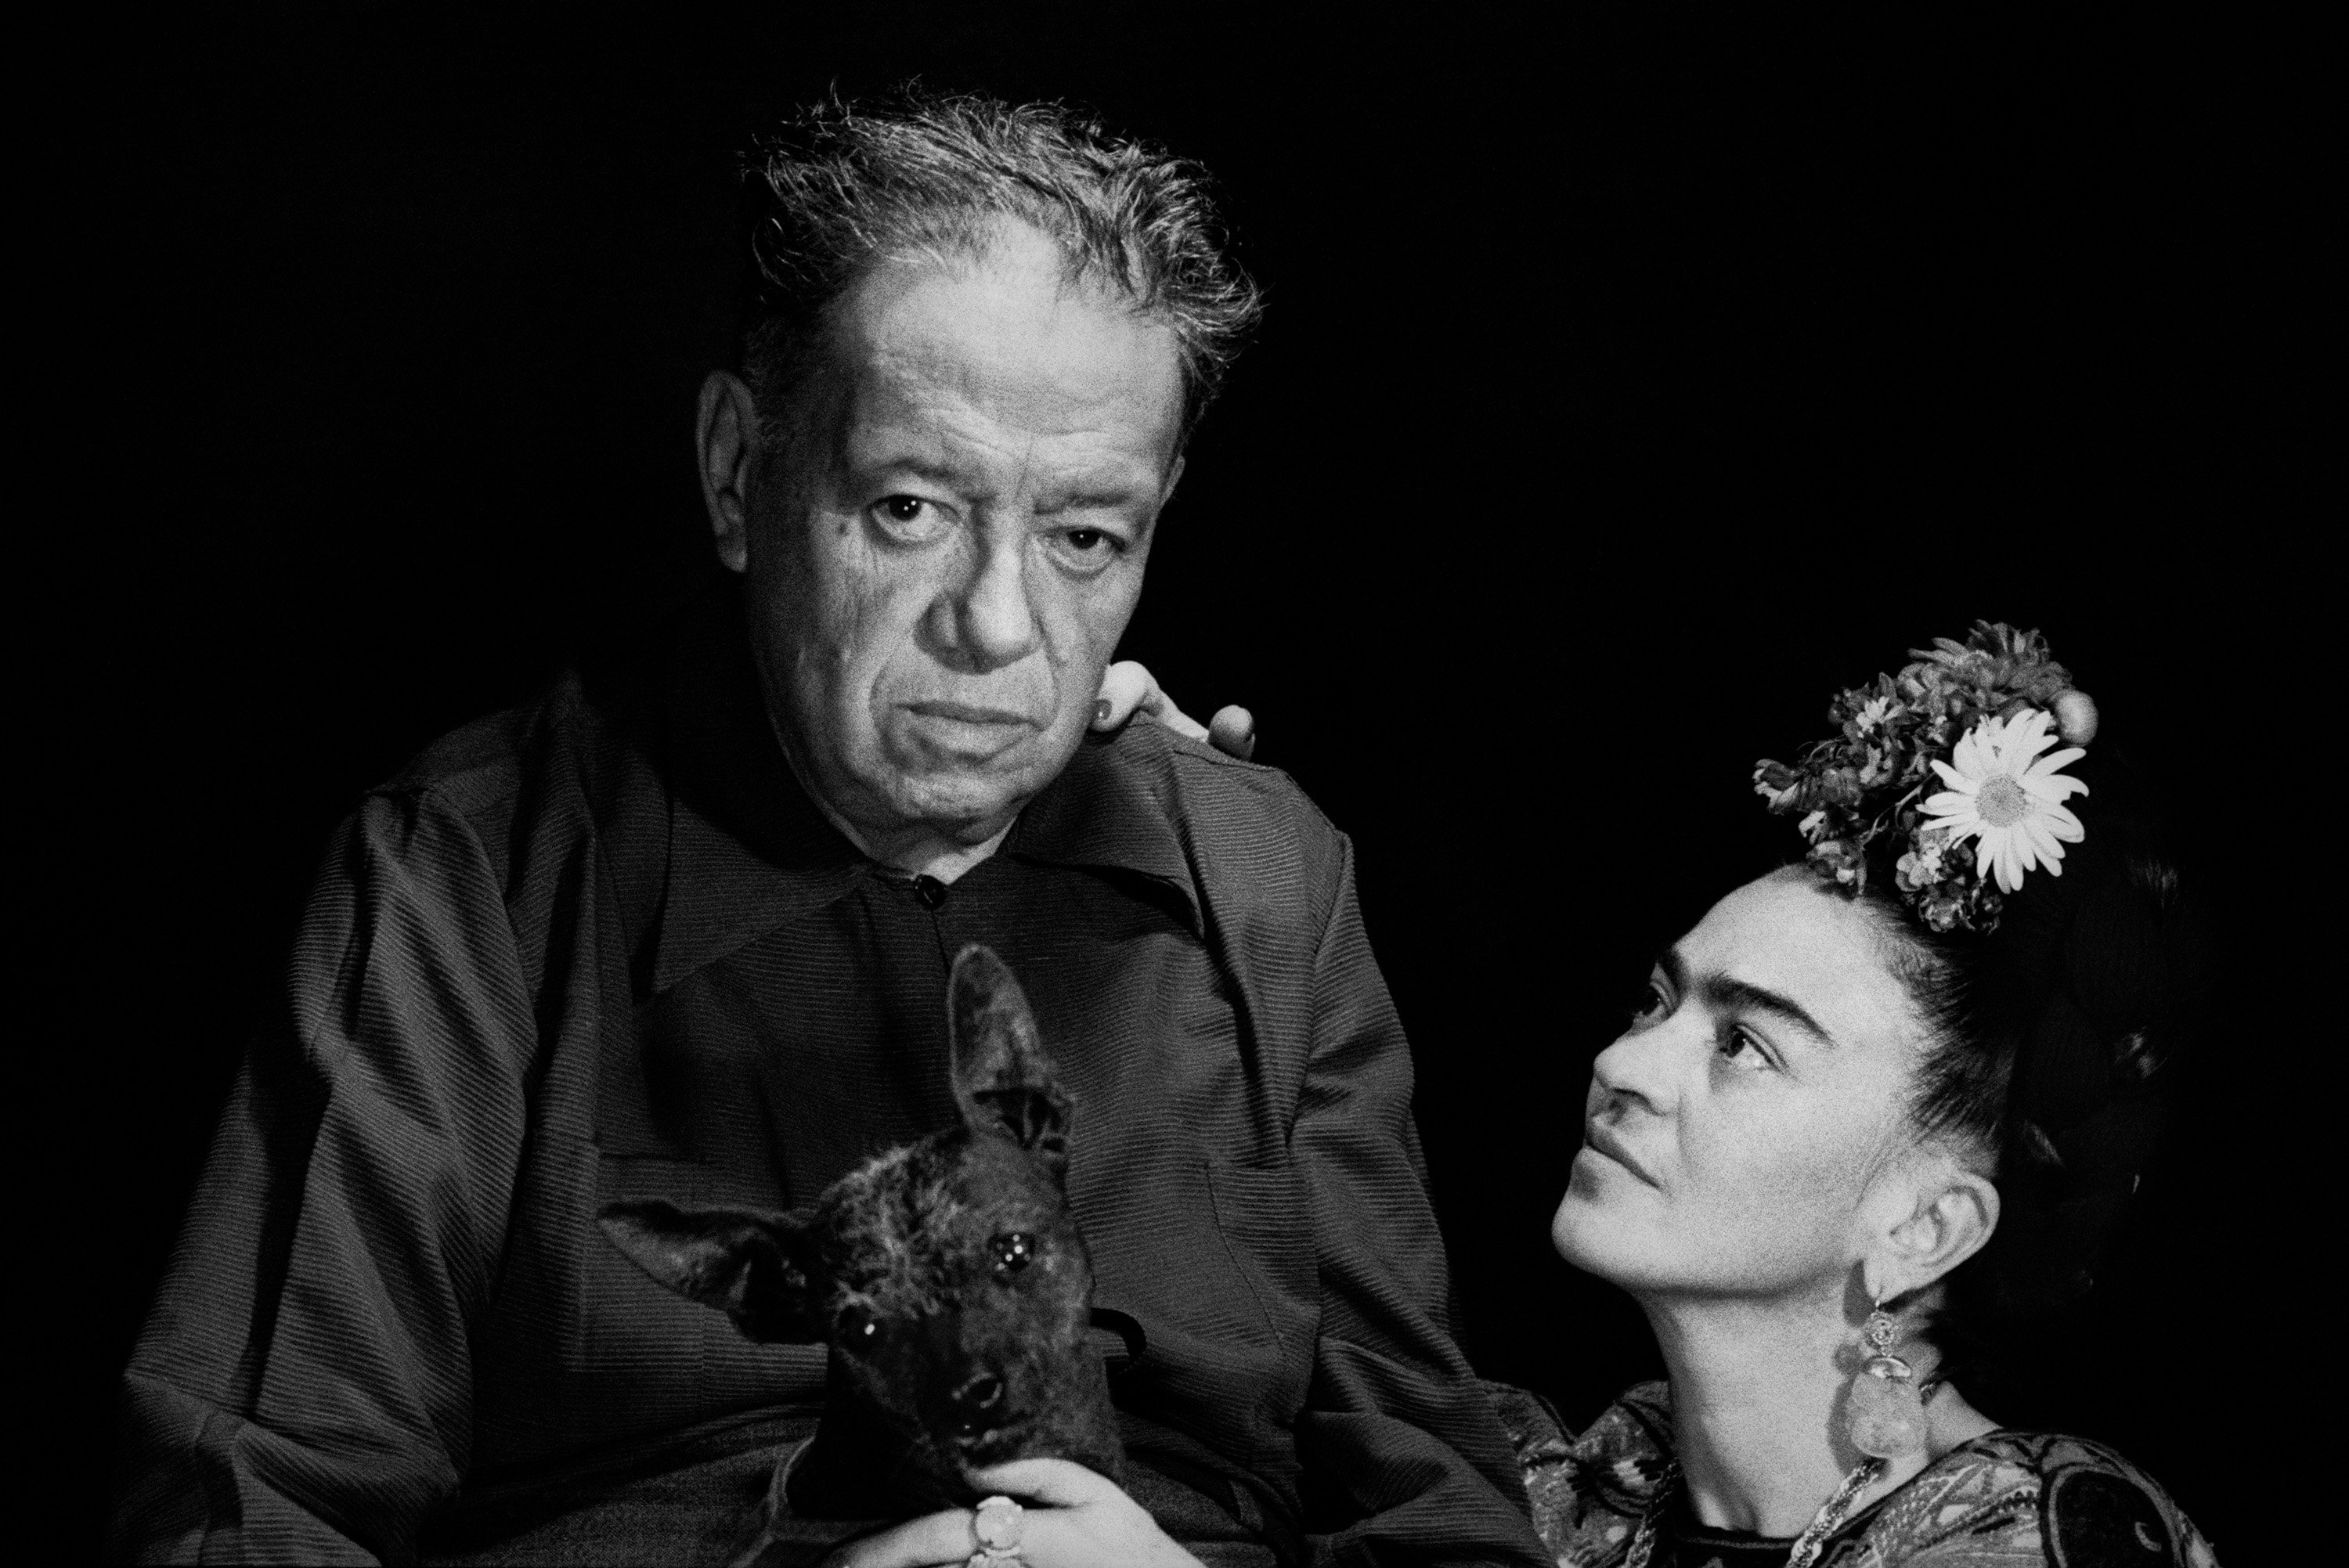 Frida Kahlo and Diego Rivera: Portrait of a complex marriage